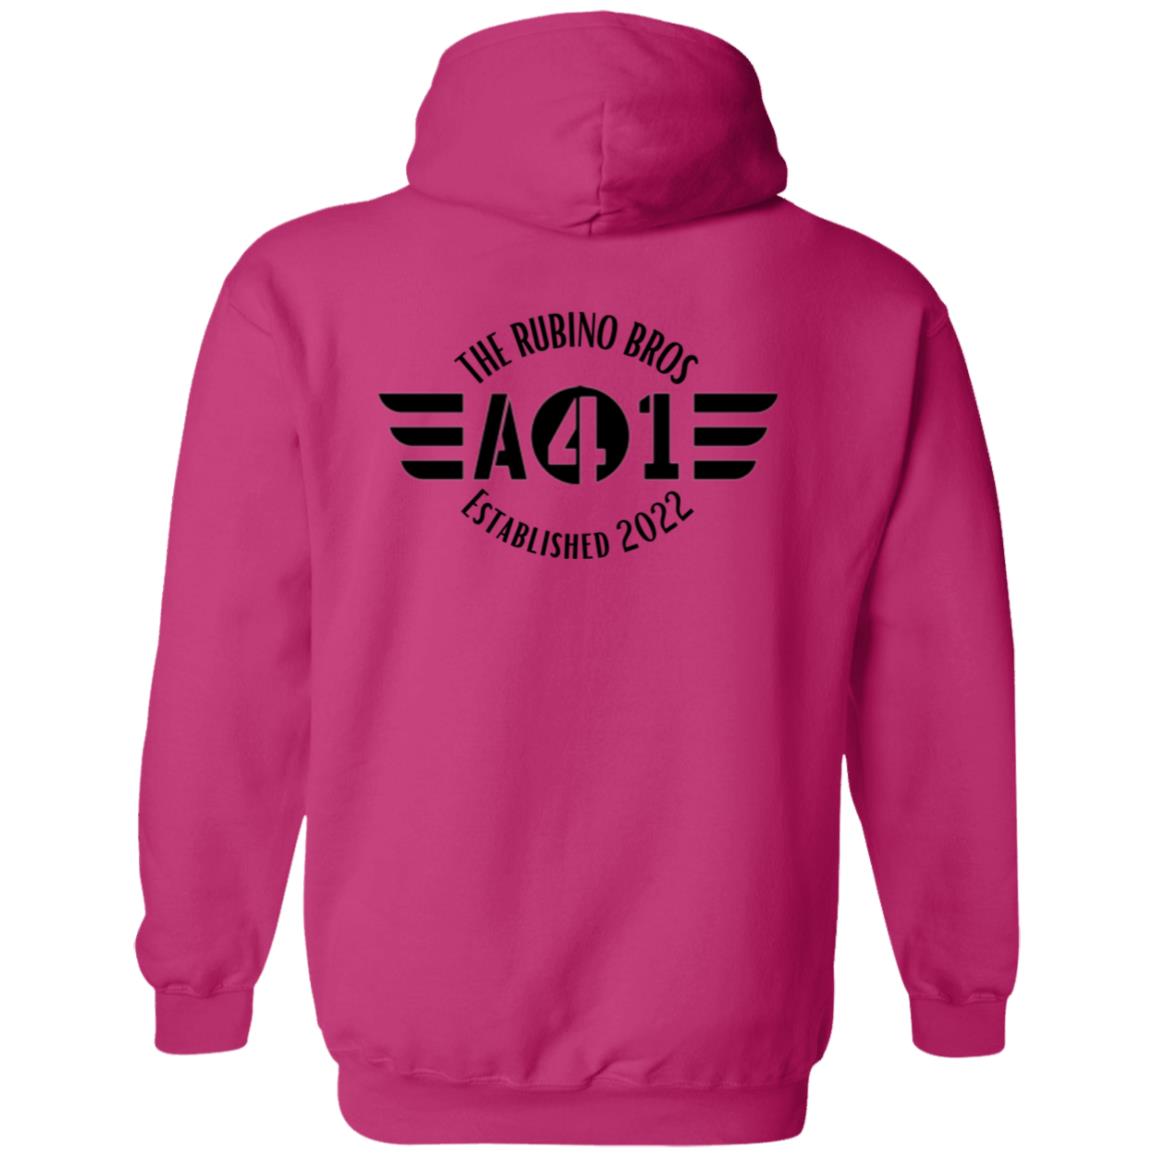 All 4 One Pullover Hoodie